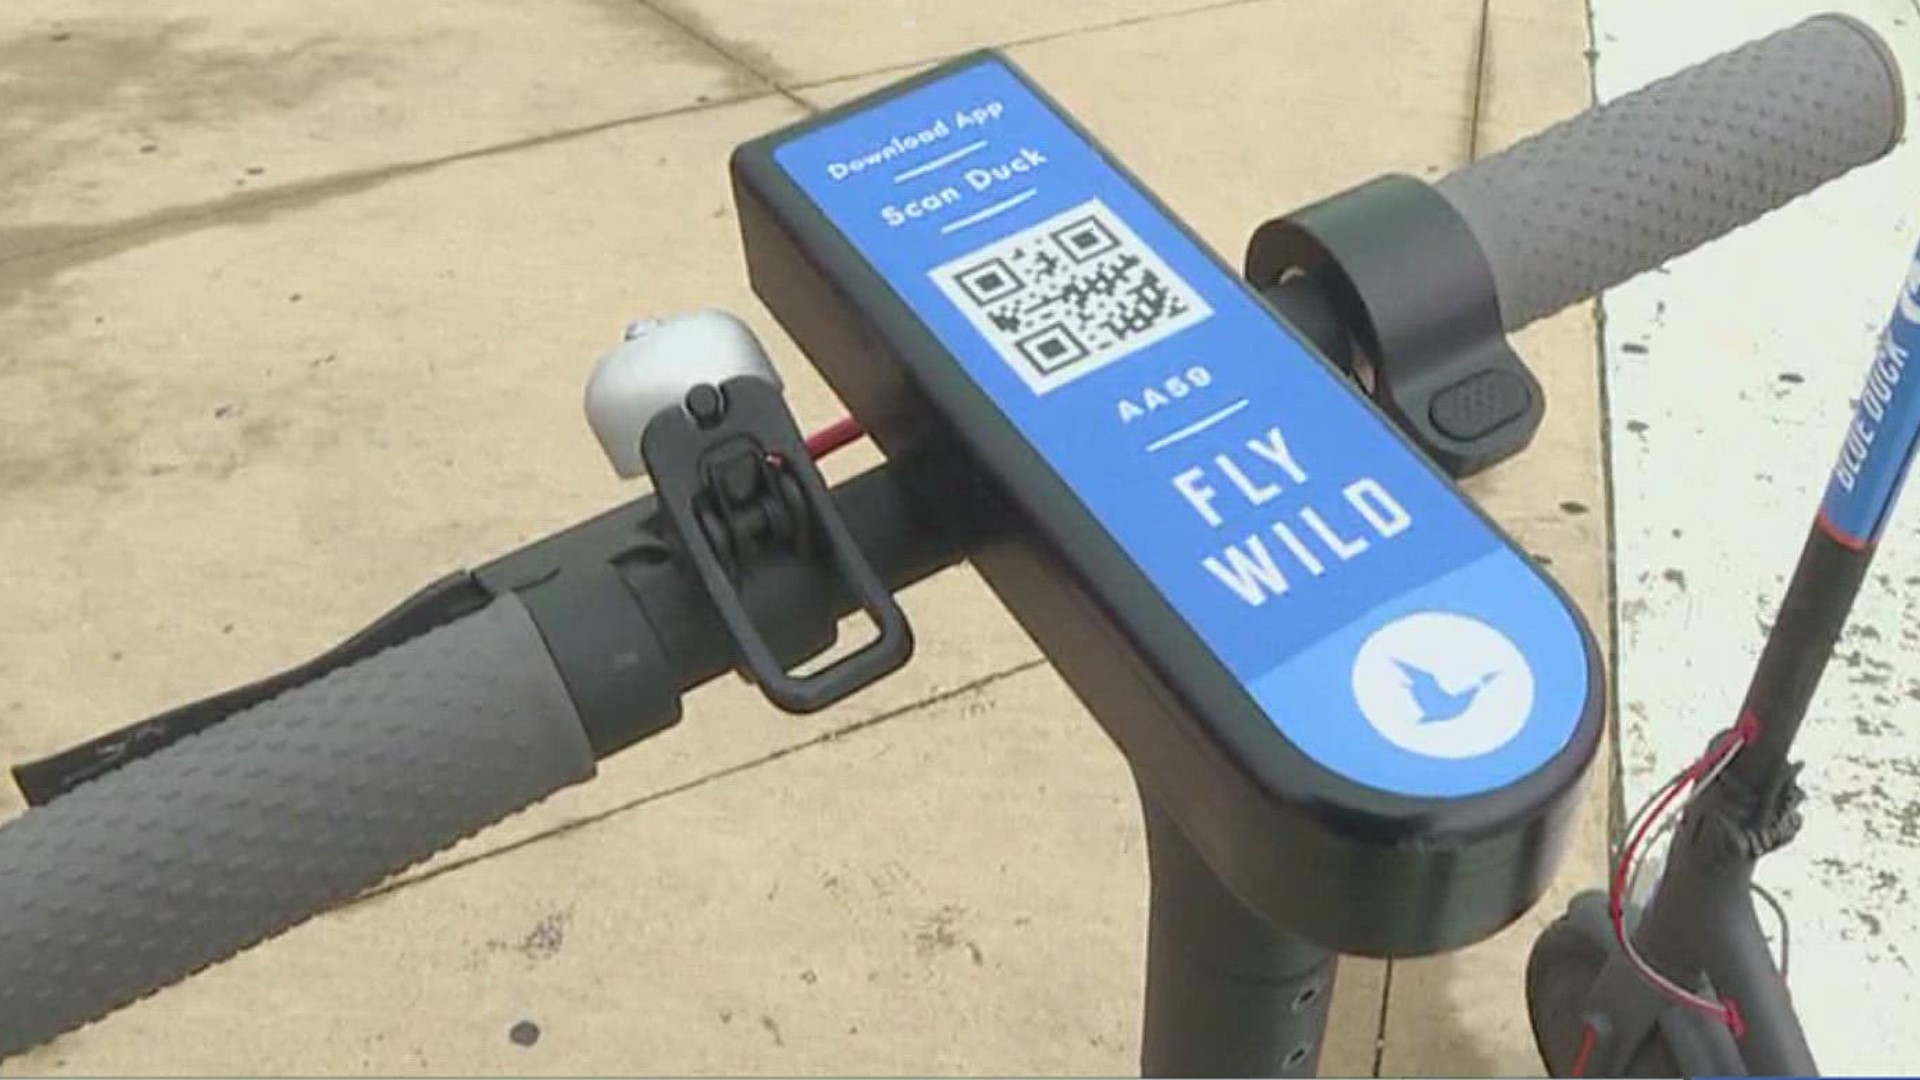 Other proposed changes include getting away from the current scooter fee of a dollar per day and replacing it with a $50 annual fee -- plus 20-cents per trip.